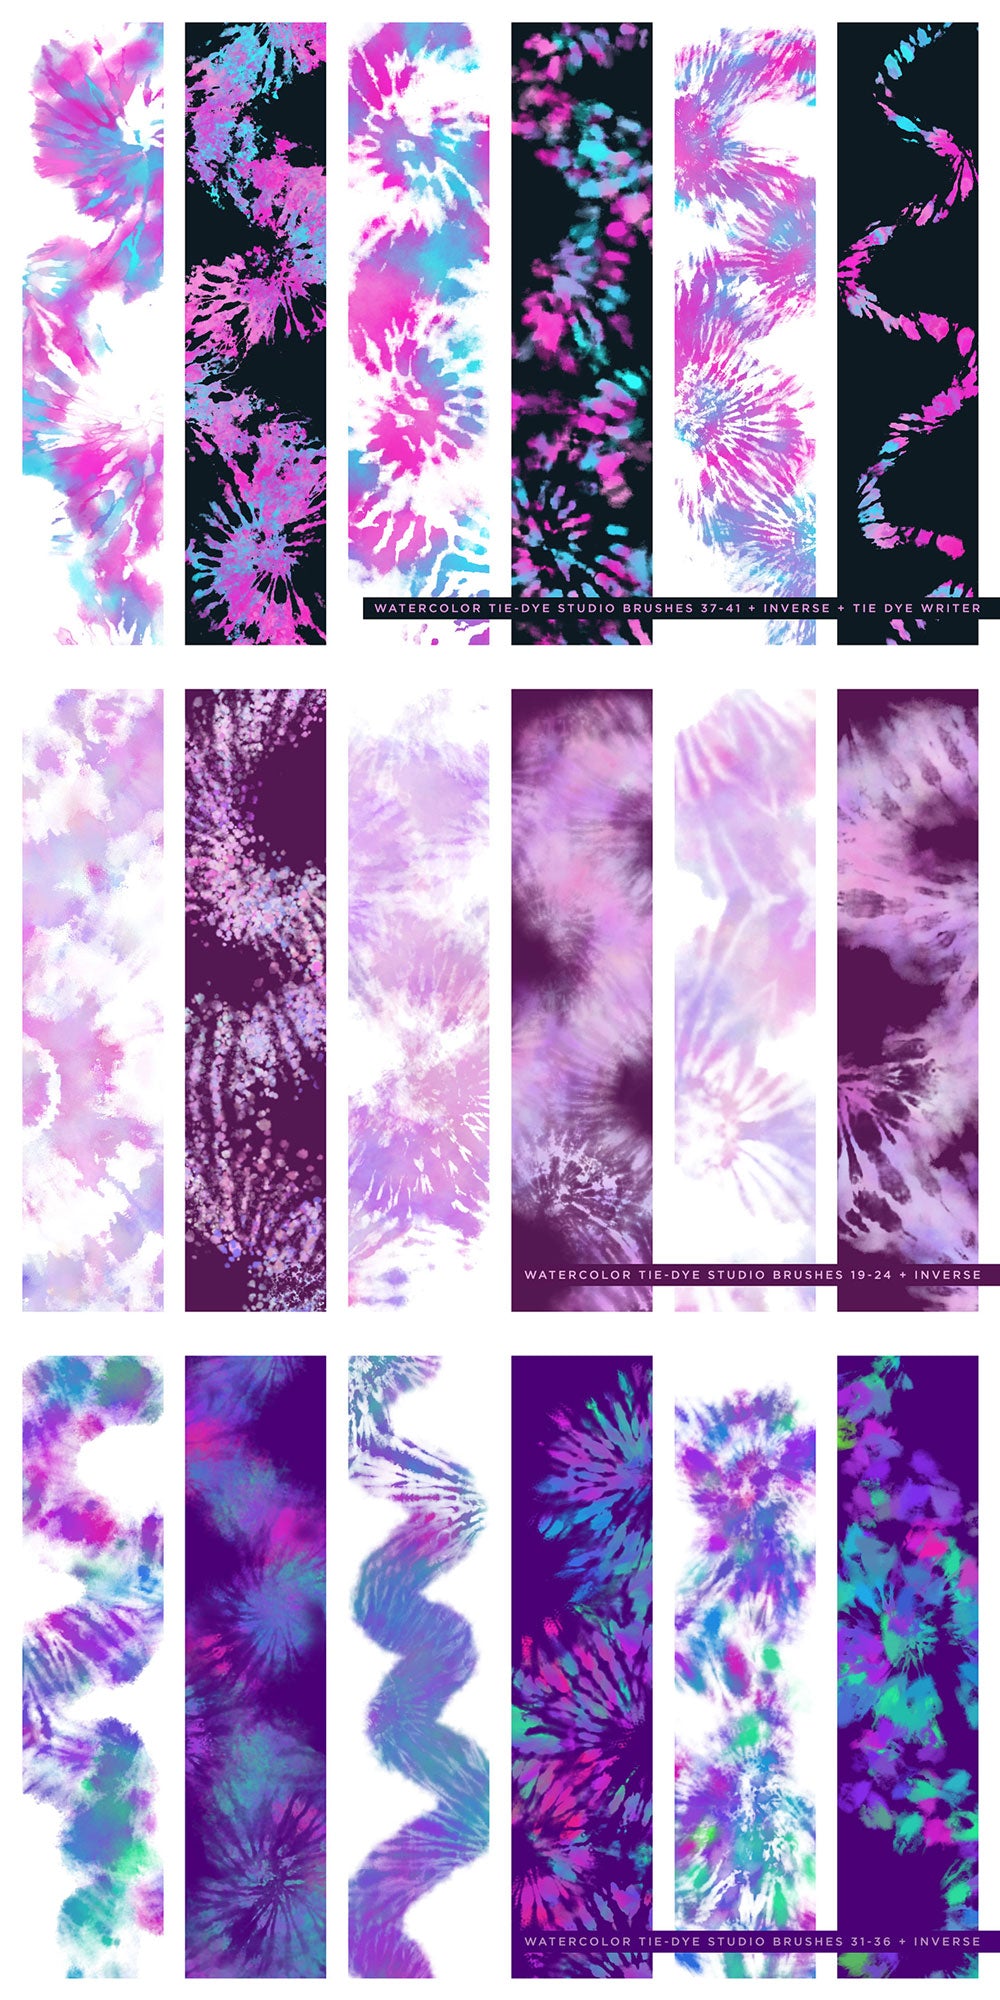 samples of digital tie-dye effects created with tie-dye photoshop brushes, brush chart